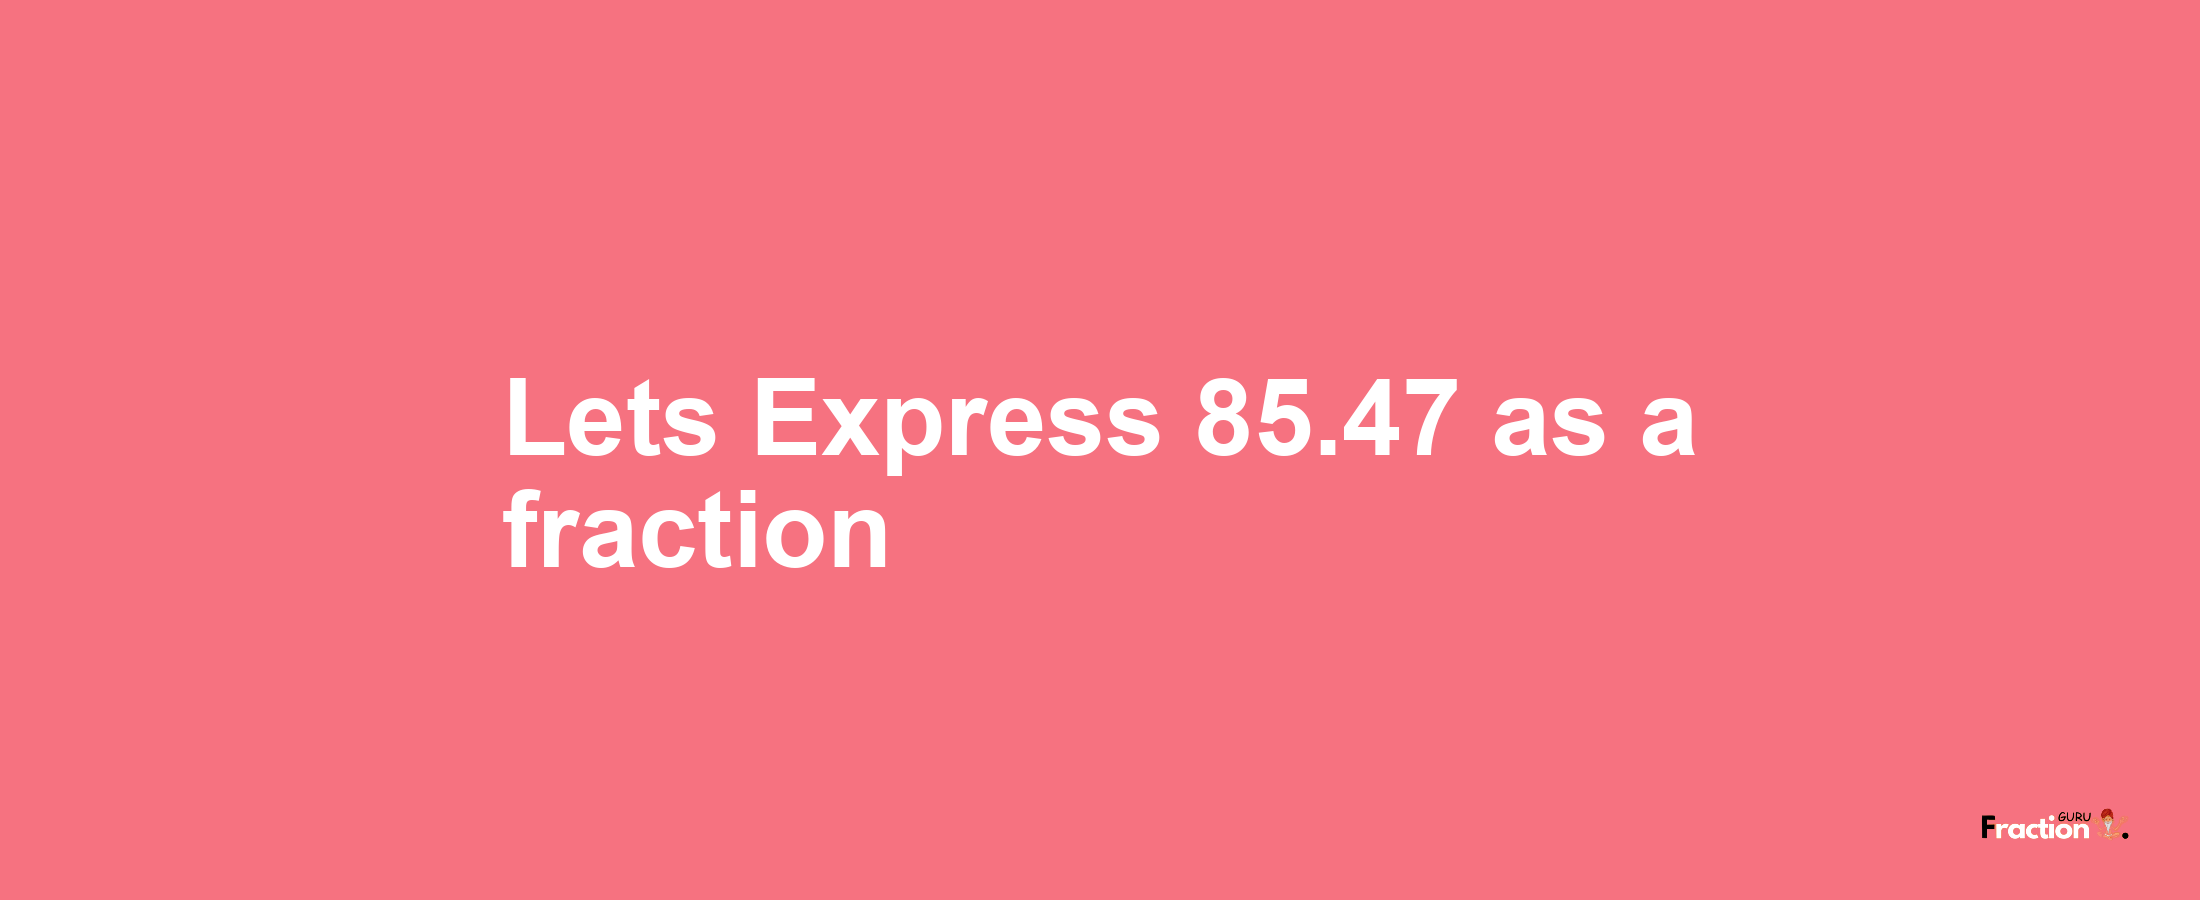 Lets Express 85.47 as afraction